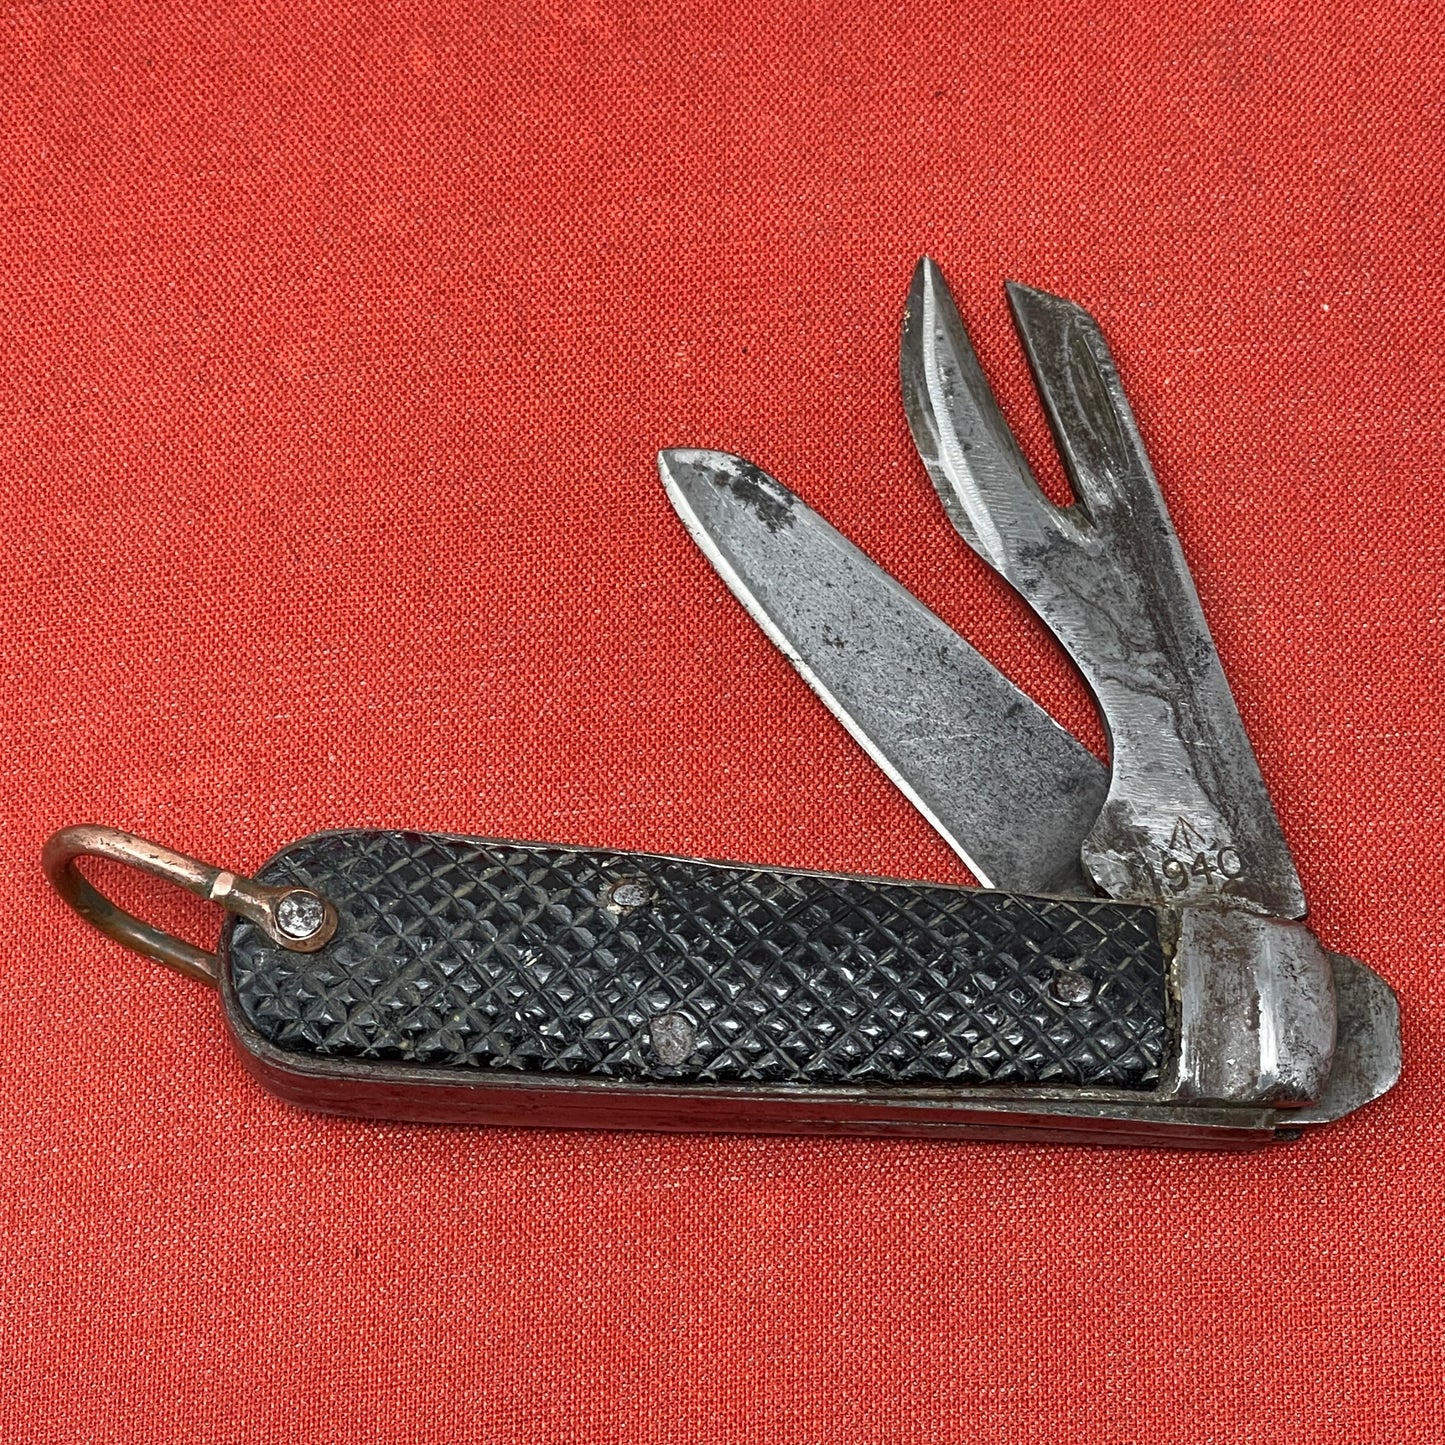 A nice example of a British Jack Knife, dated 1940  The blades are in good condition, the chequered Bakelite grip is intact and all the blades lock and close as they should. The steel can opener is in good condition